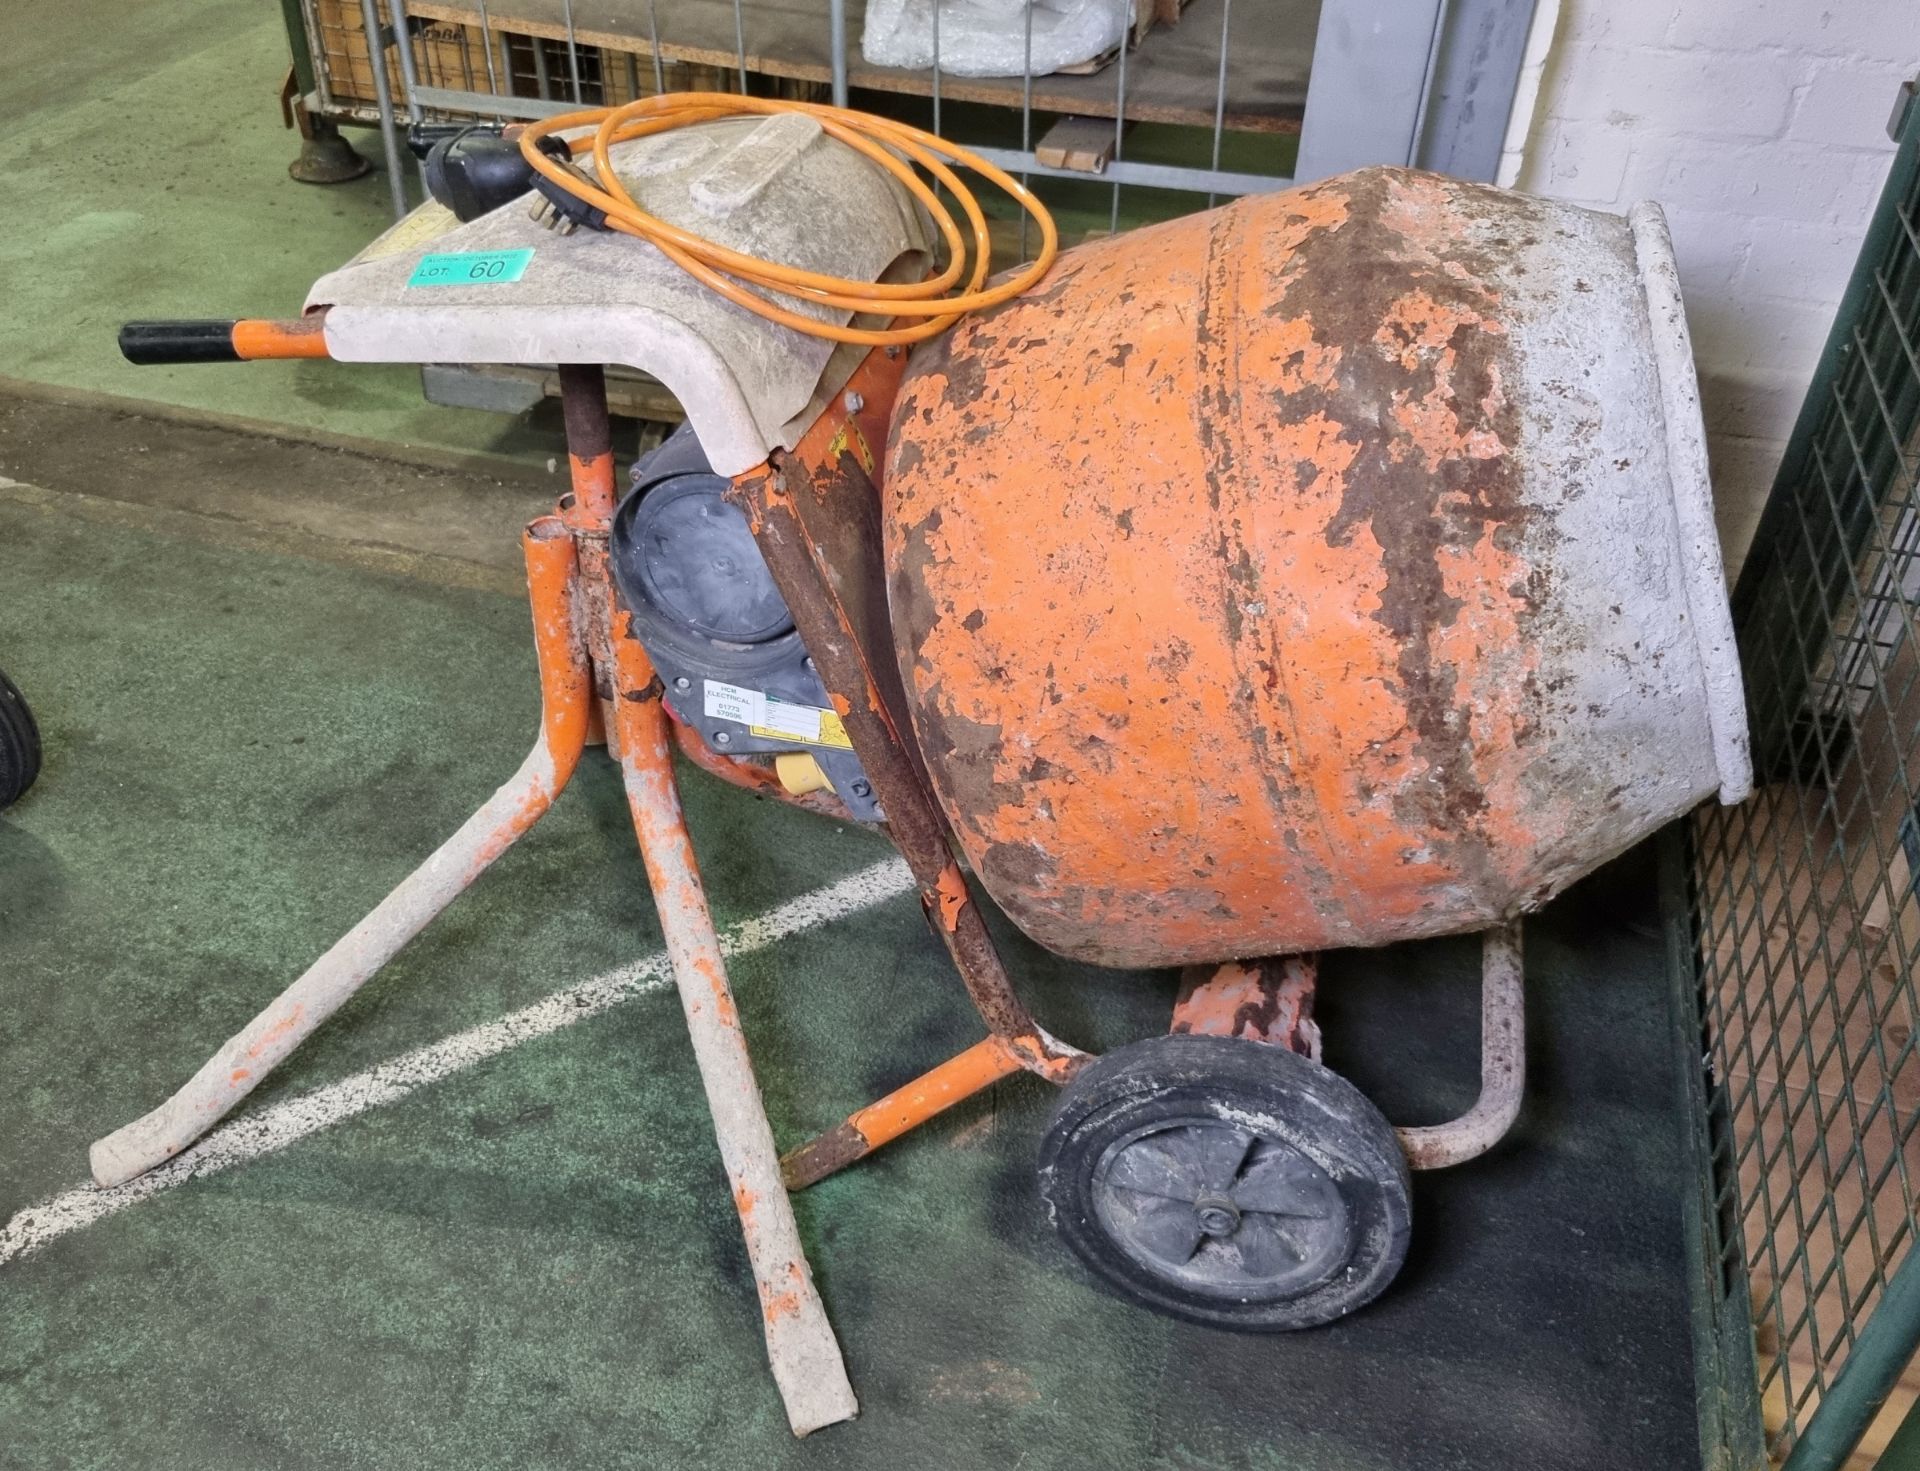 Belle Minimix 150 electric cement mixer with stand - 119x60x92cm - Image 2 of 6